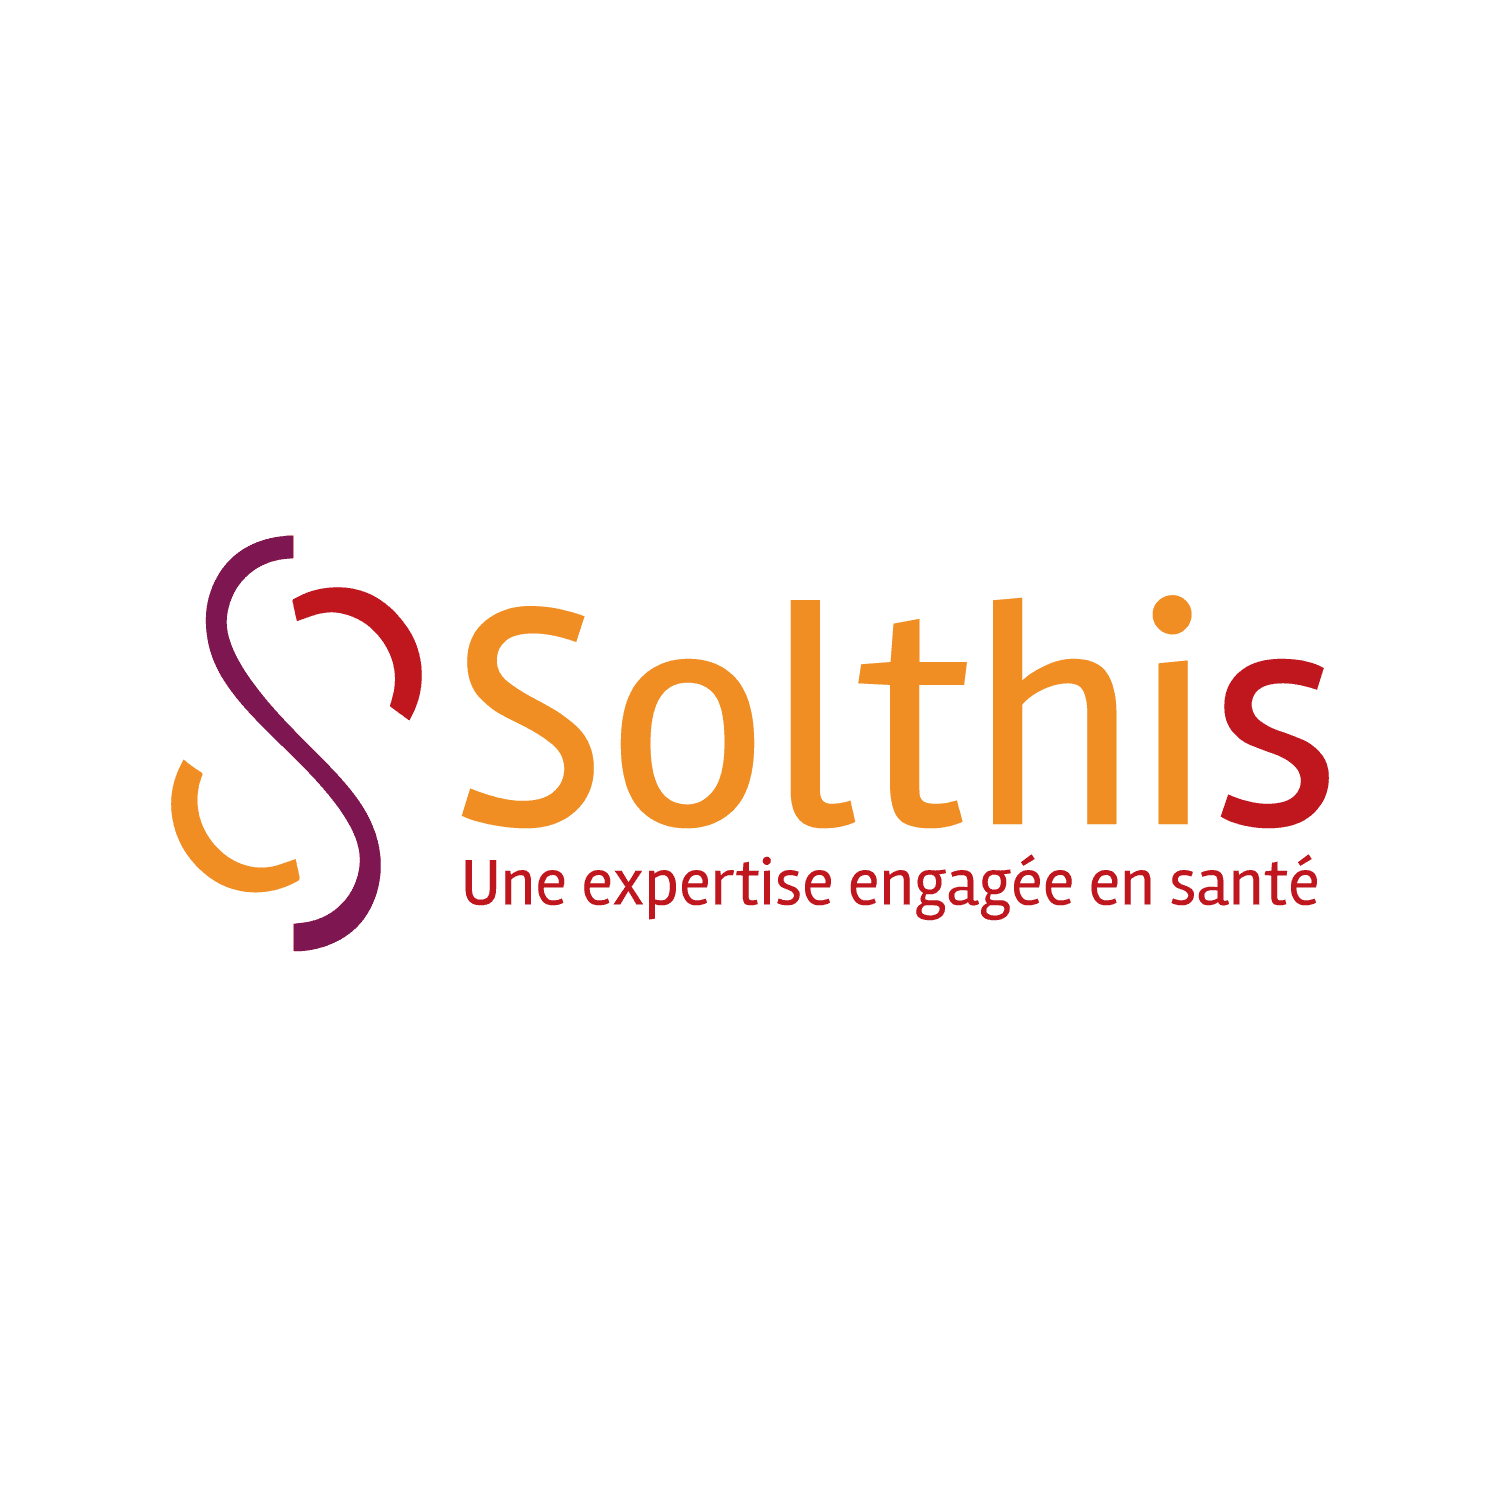 Solthis 